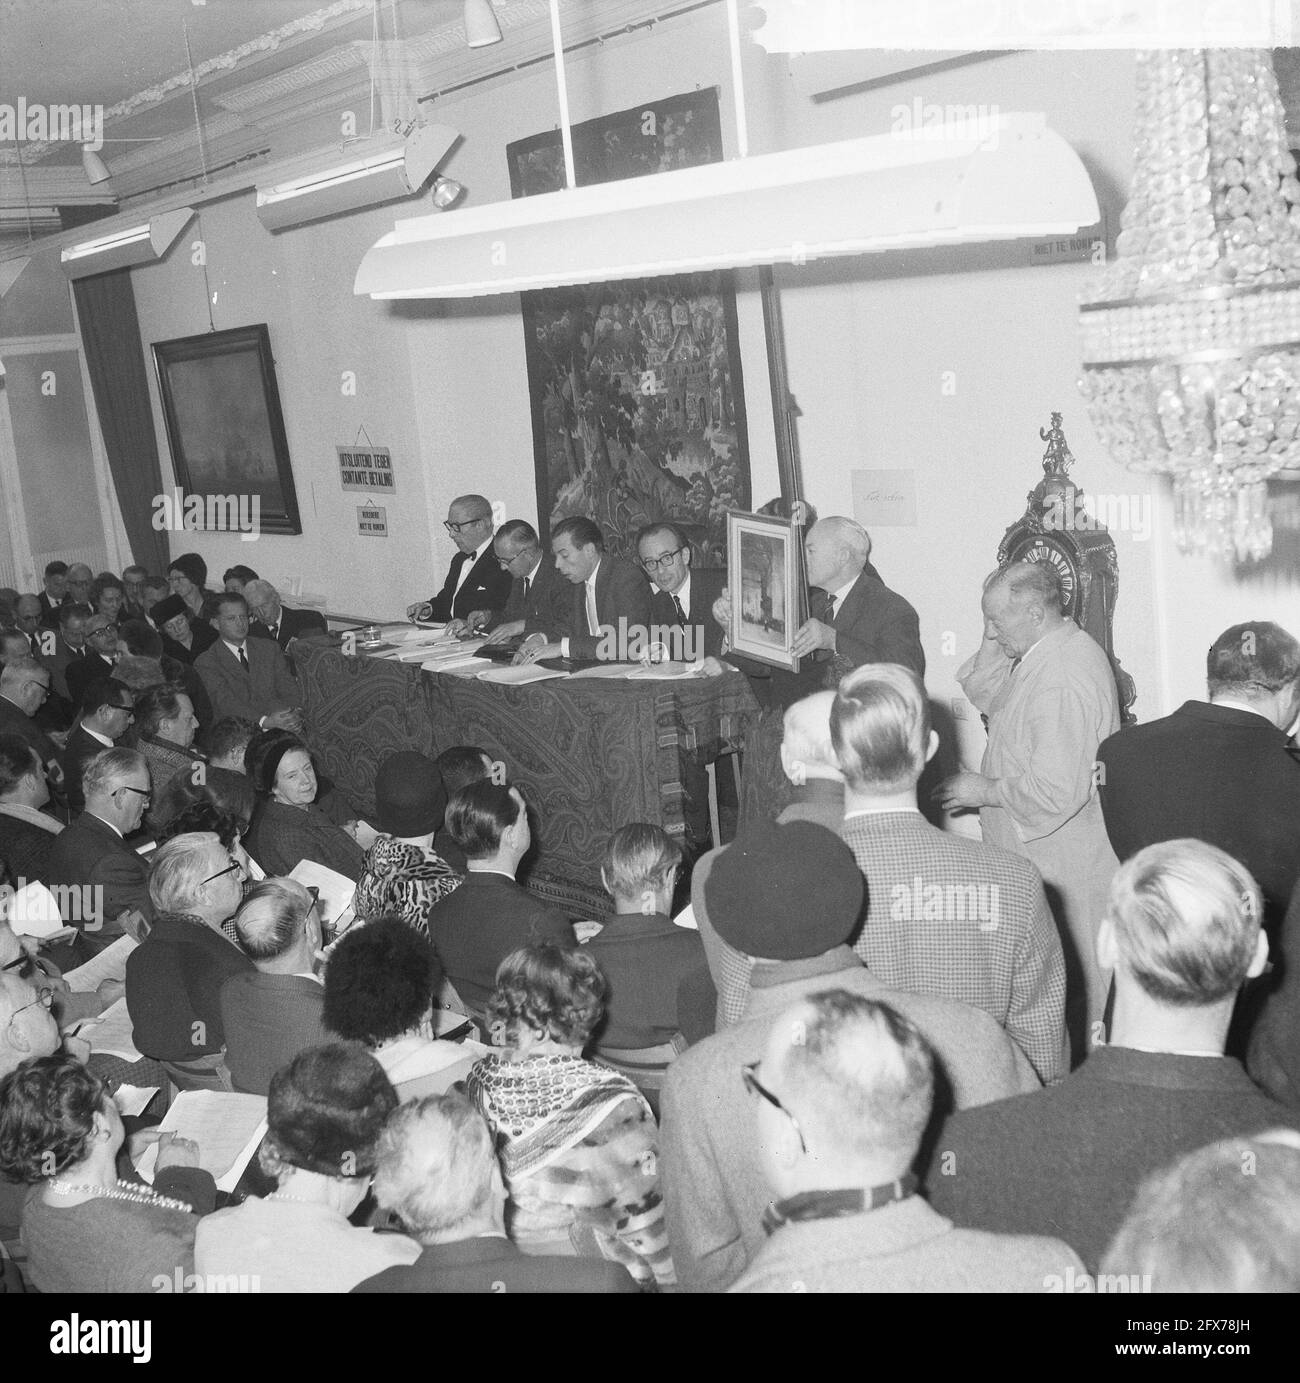 In auction house Paul Brandt old masters auctioned off. A Salomon van Ruysdael went away for £29,000, December 17, 1963, Auctions, The Netherlands, 20th century press photo, news to remember, documentary,